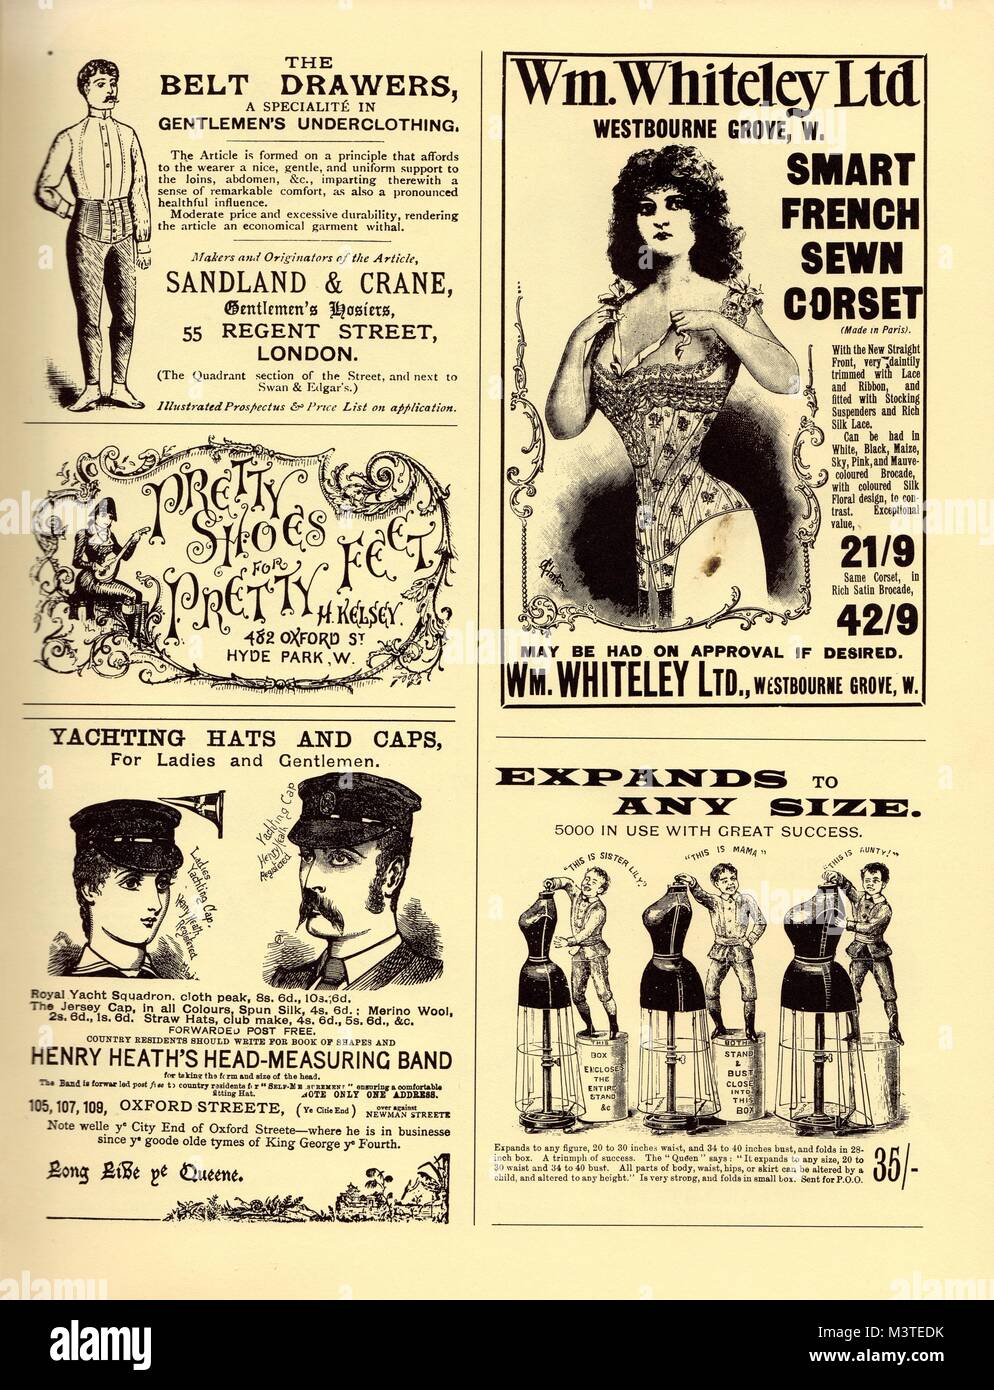 Victorian and Edwardian Advertising Posters showing underwear and